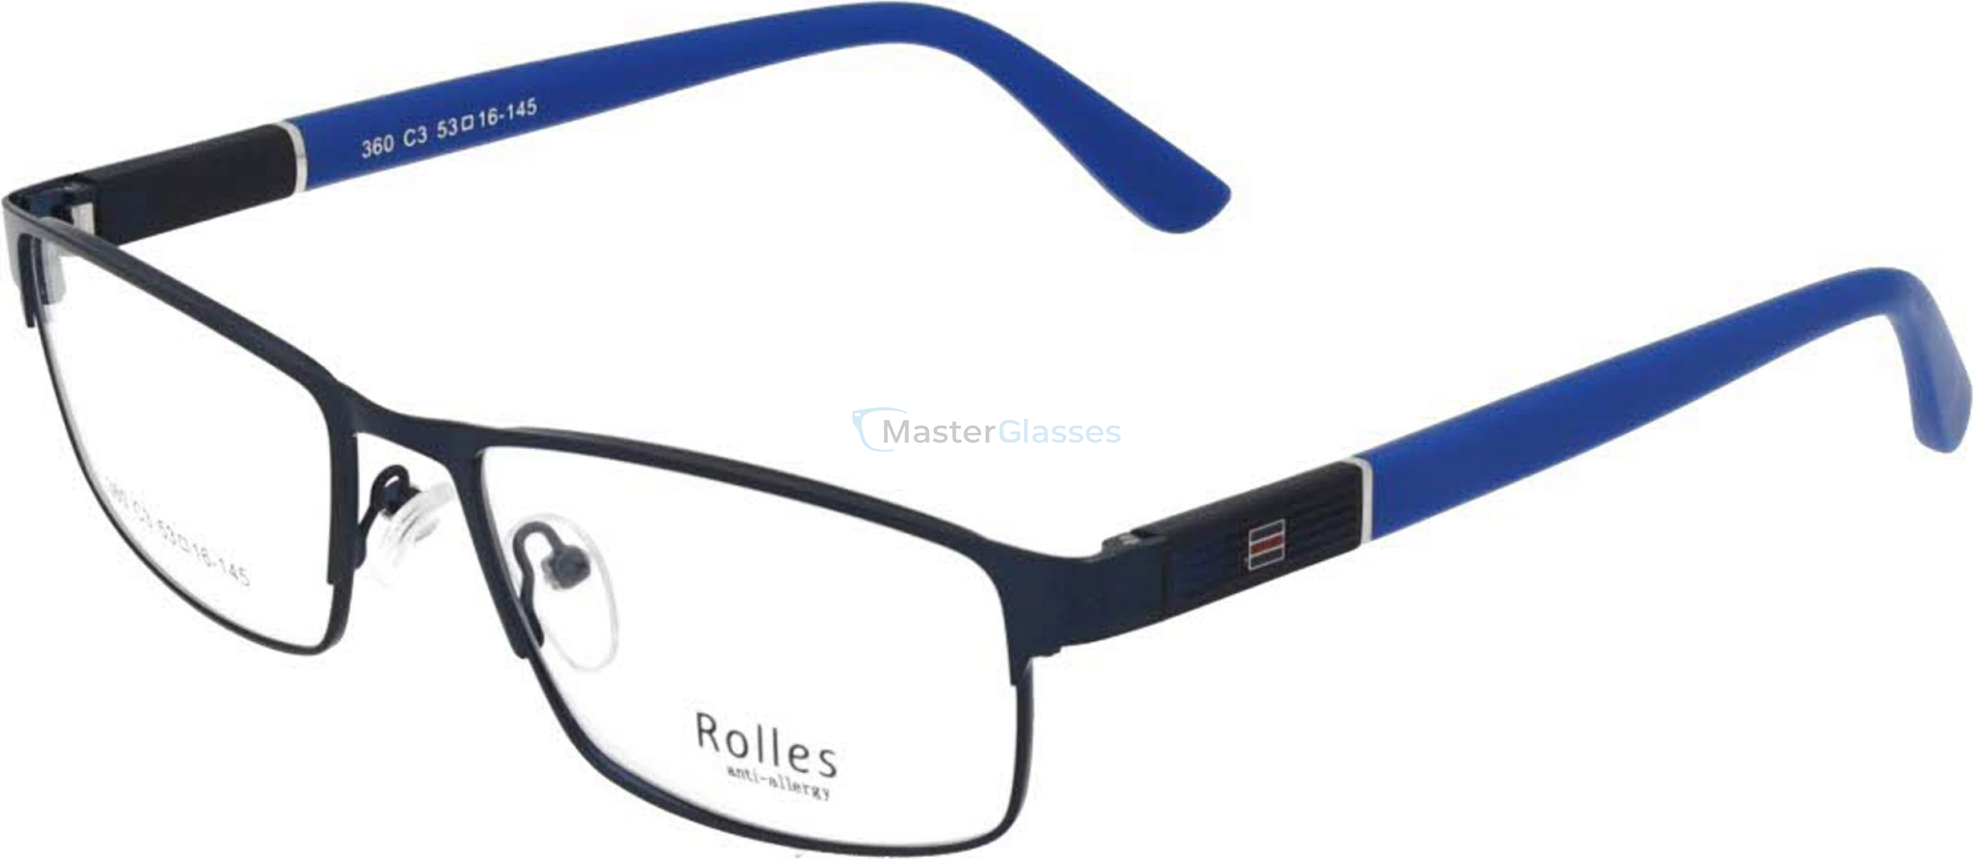  Rolles 360 03